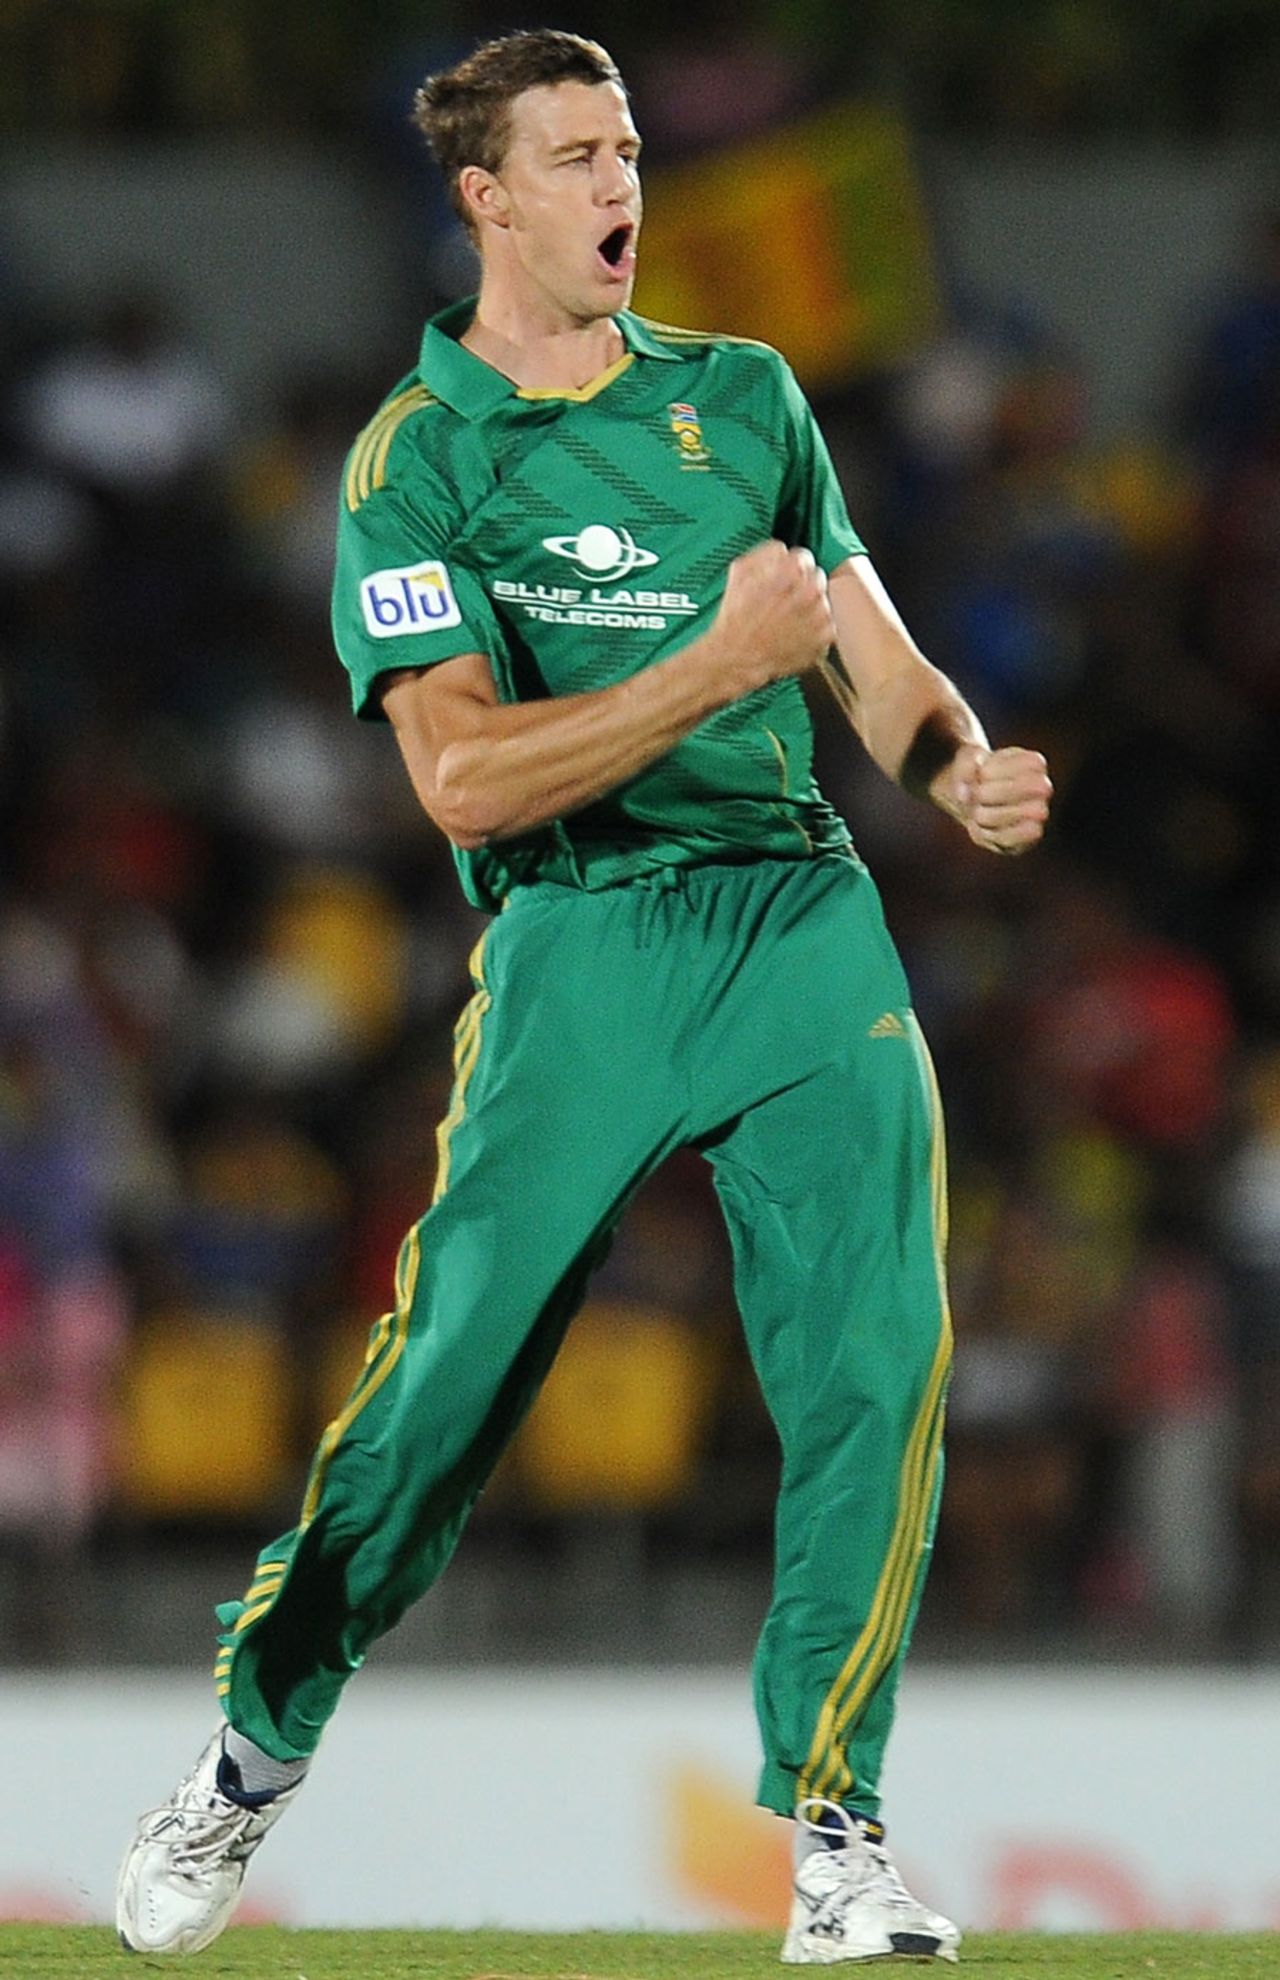 Morne Morkel punches the air after picking up a wicket, Sri Lanka v South Africa, 2nd T20I, Hambantota, August 4, 2013